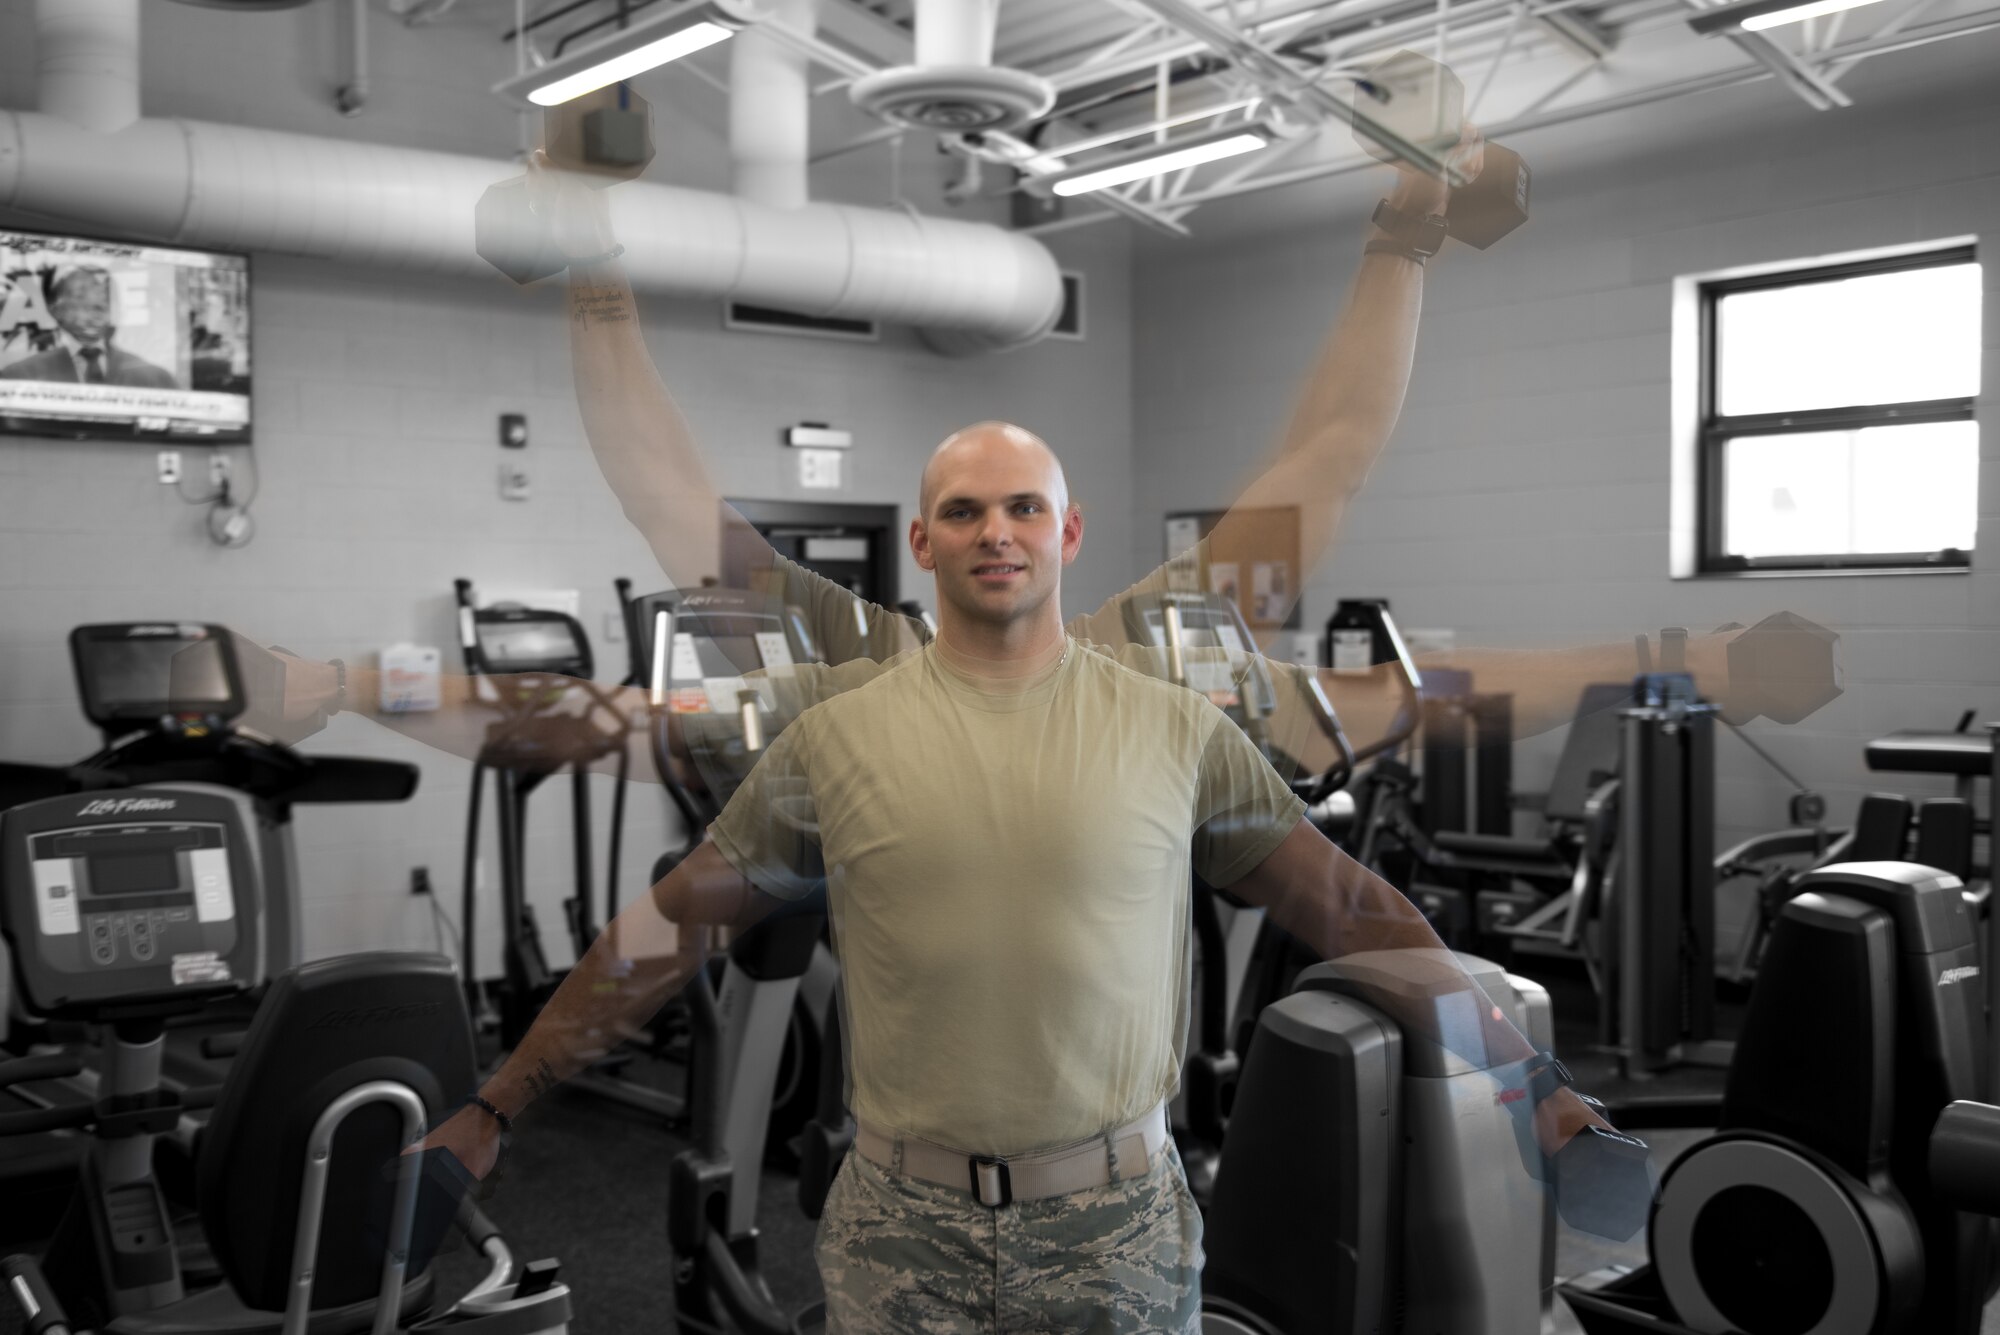 Airman 1st Class Adam Schuck, a services specialist with the 193rd Special Operations Force Support Squadron, Pennsylvania Air National Guard, performs a shoulder exercise